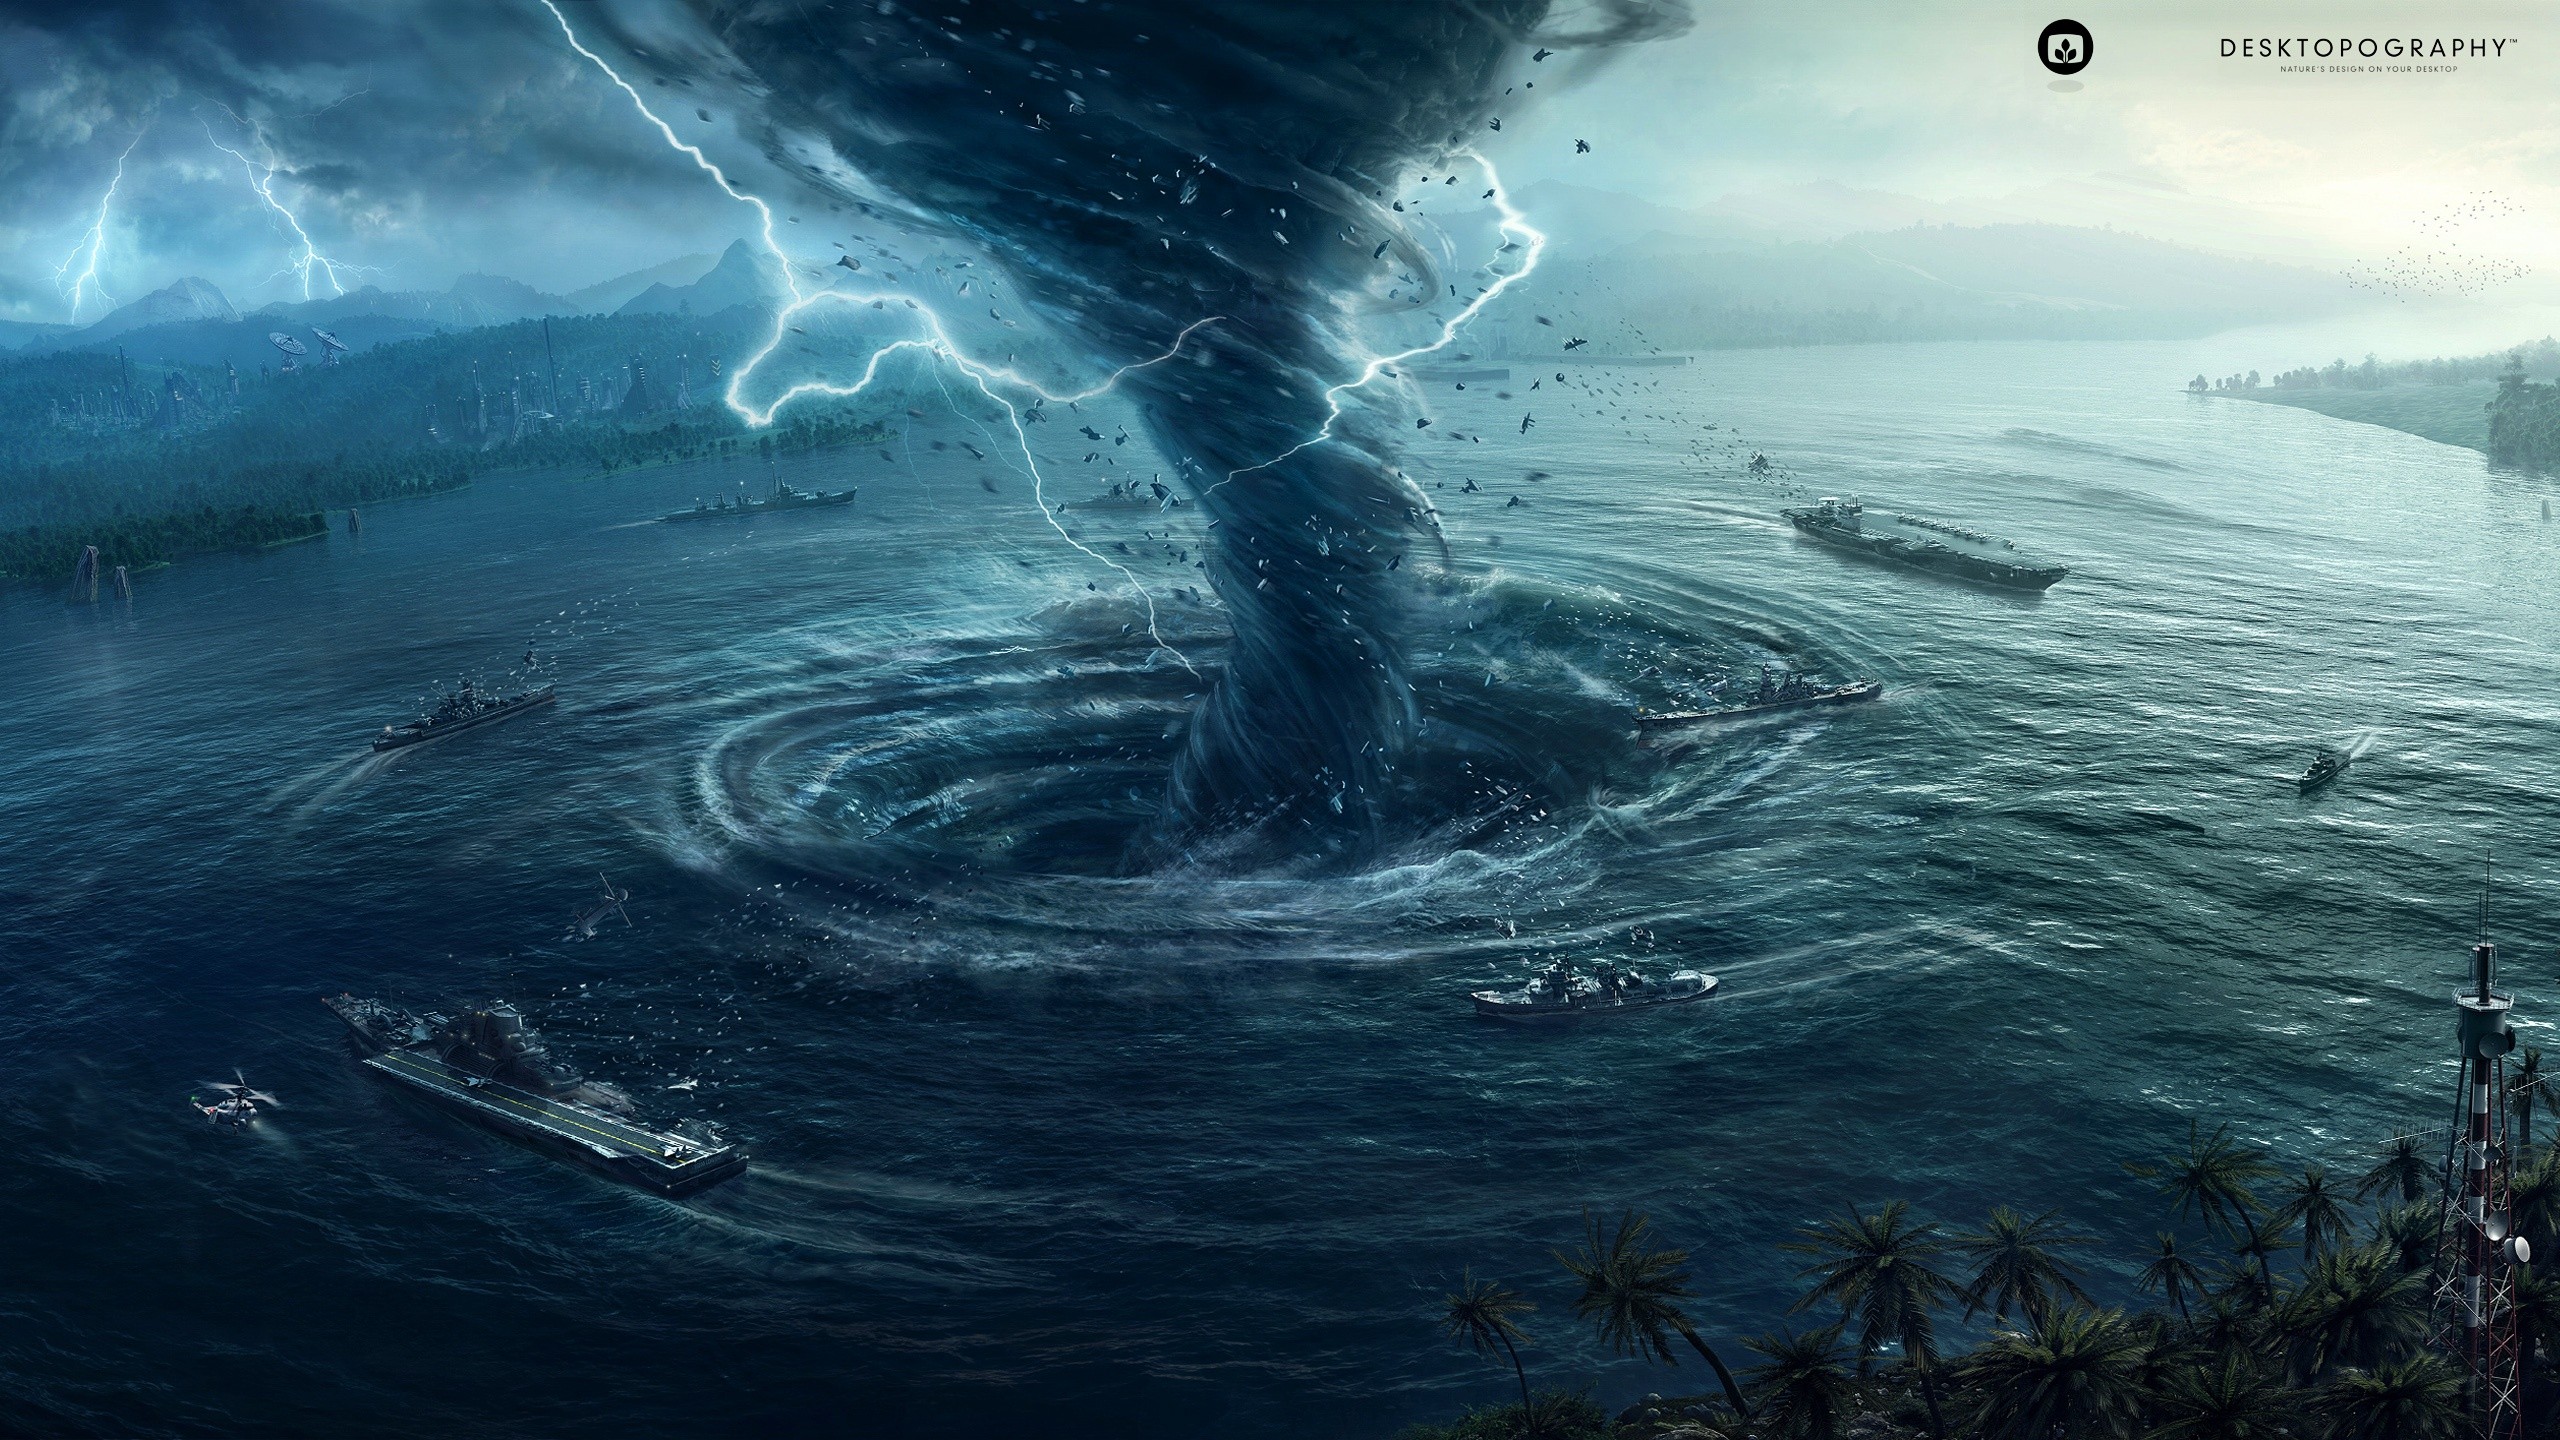 General 2560x1440 sea tornado nature water digital art storm lightning ship mountains palm trees vortex whirling aircraft carrier aircraft helicopters satellite trees forest aerial view apocalyptic